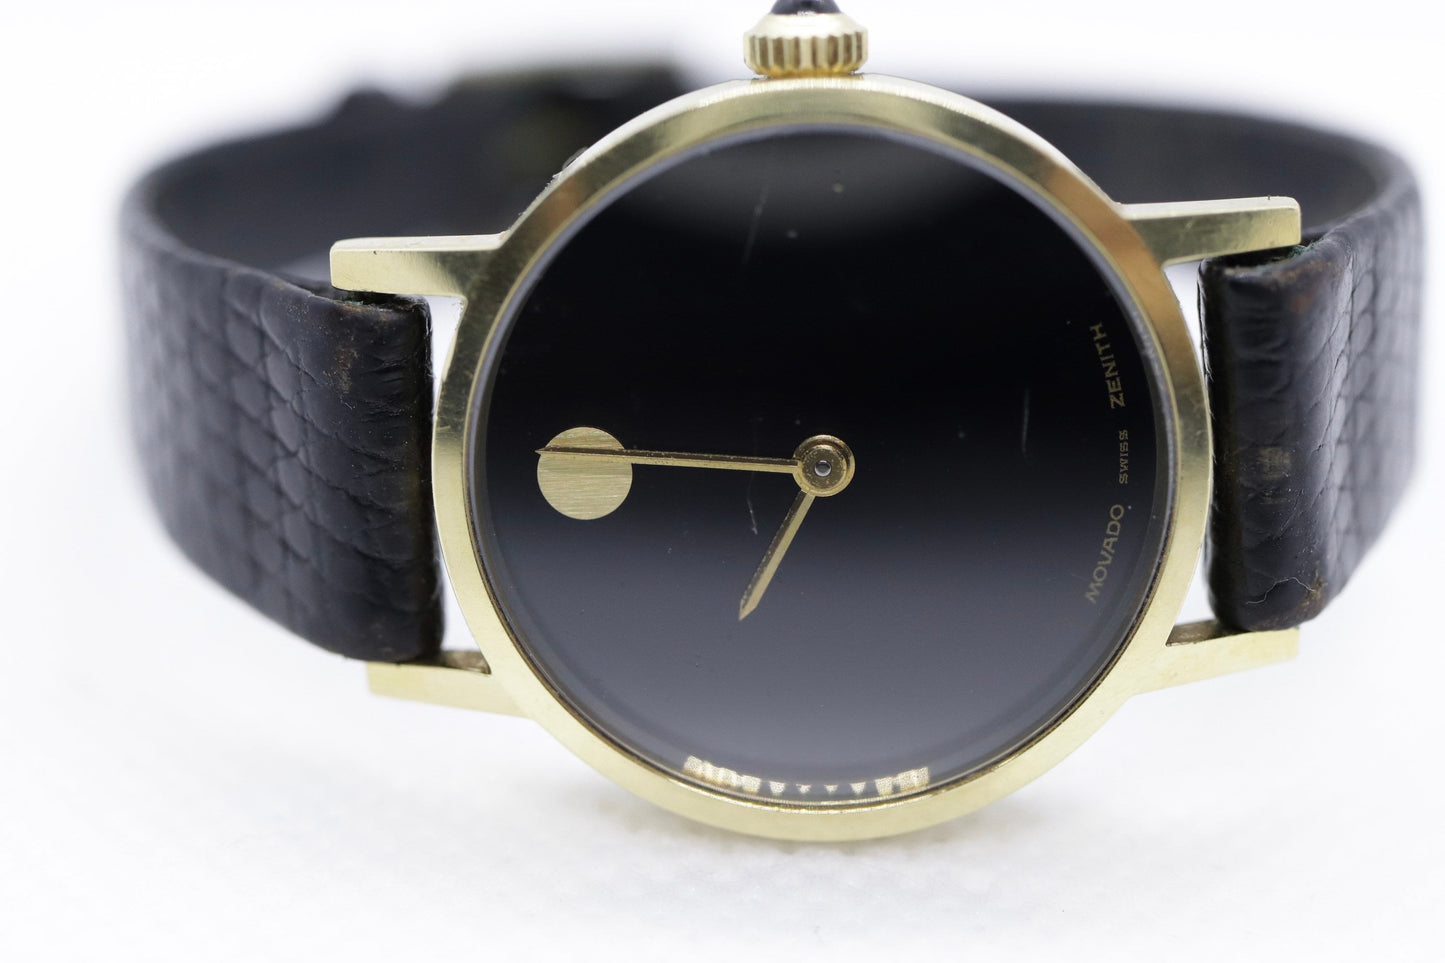 14k MOVADO Zenith Round Mechanical Watch. Movado Vintage Ladies watch with black leather band st(124/85)